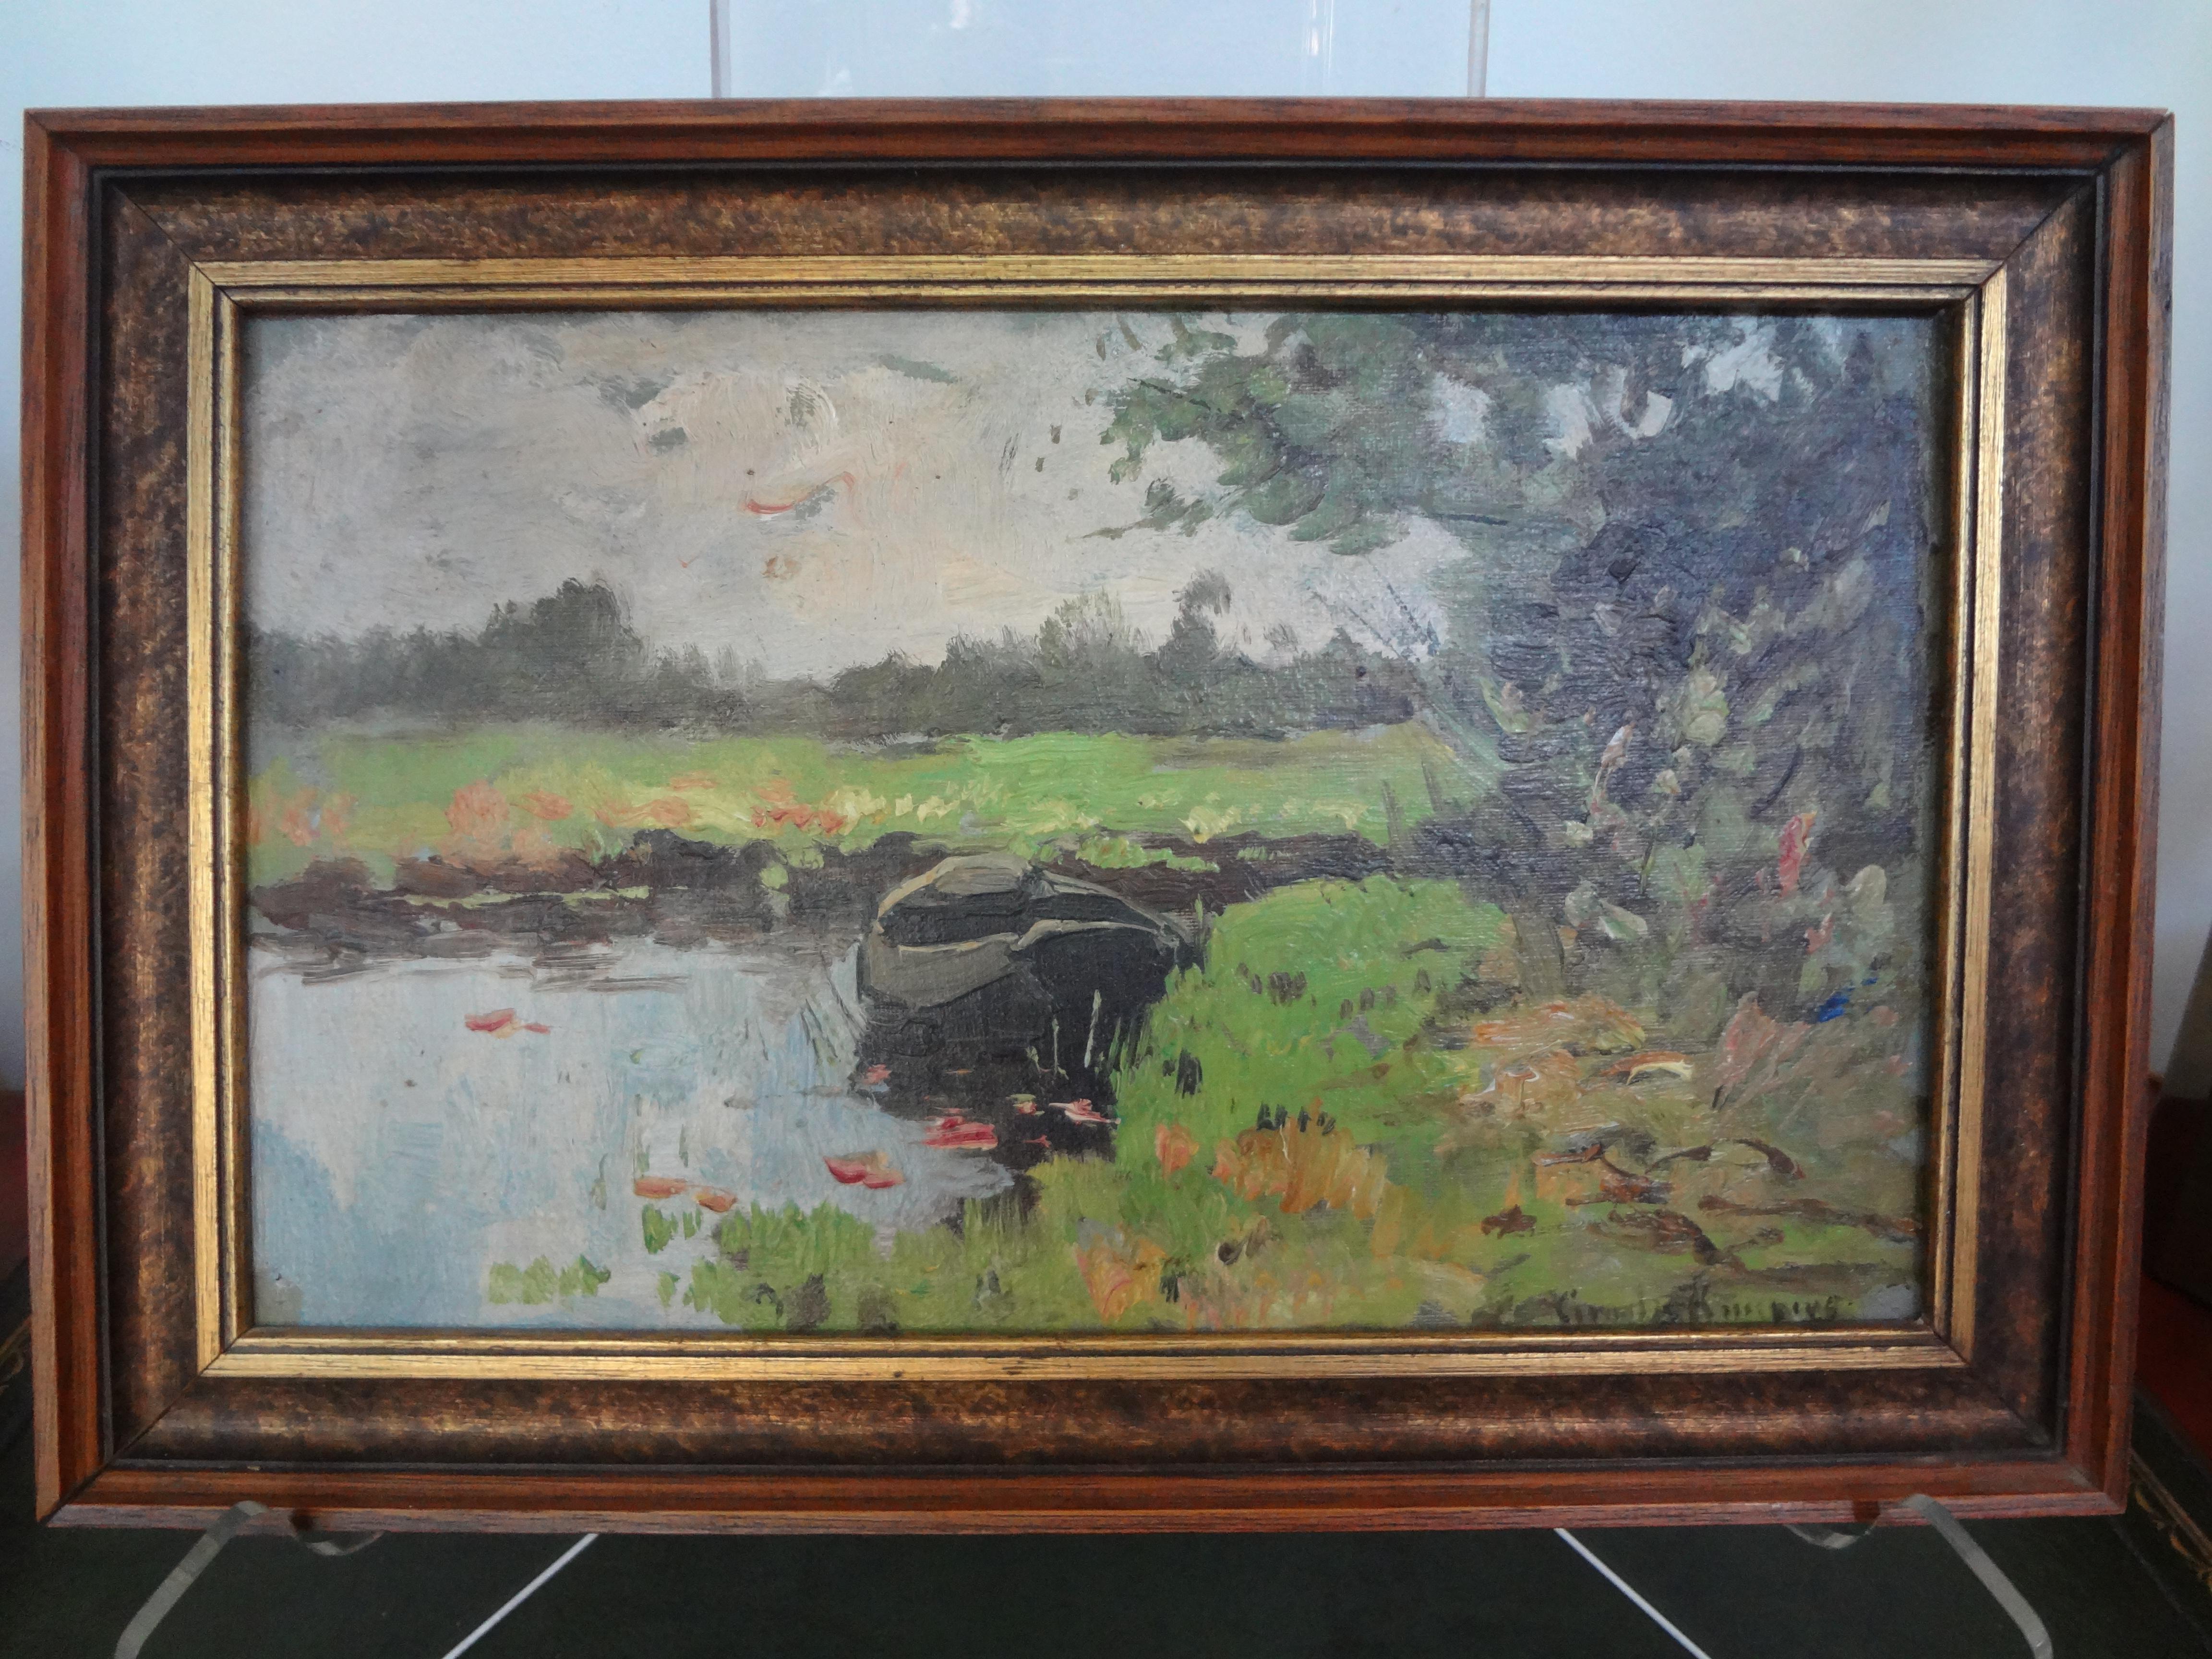 Antique framed impressionist oil painting on board.
Lovely artist signed antique framed impressionist oil painting on board. This beauty depicts a lake scene with a boat and beautiful flora.
This well executed painting is signed but unfortunately